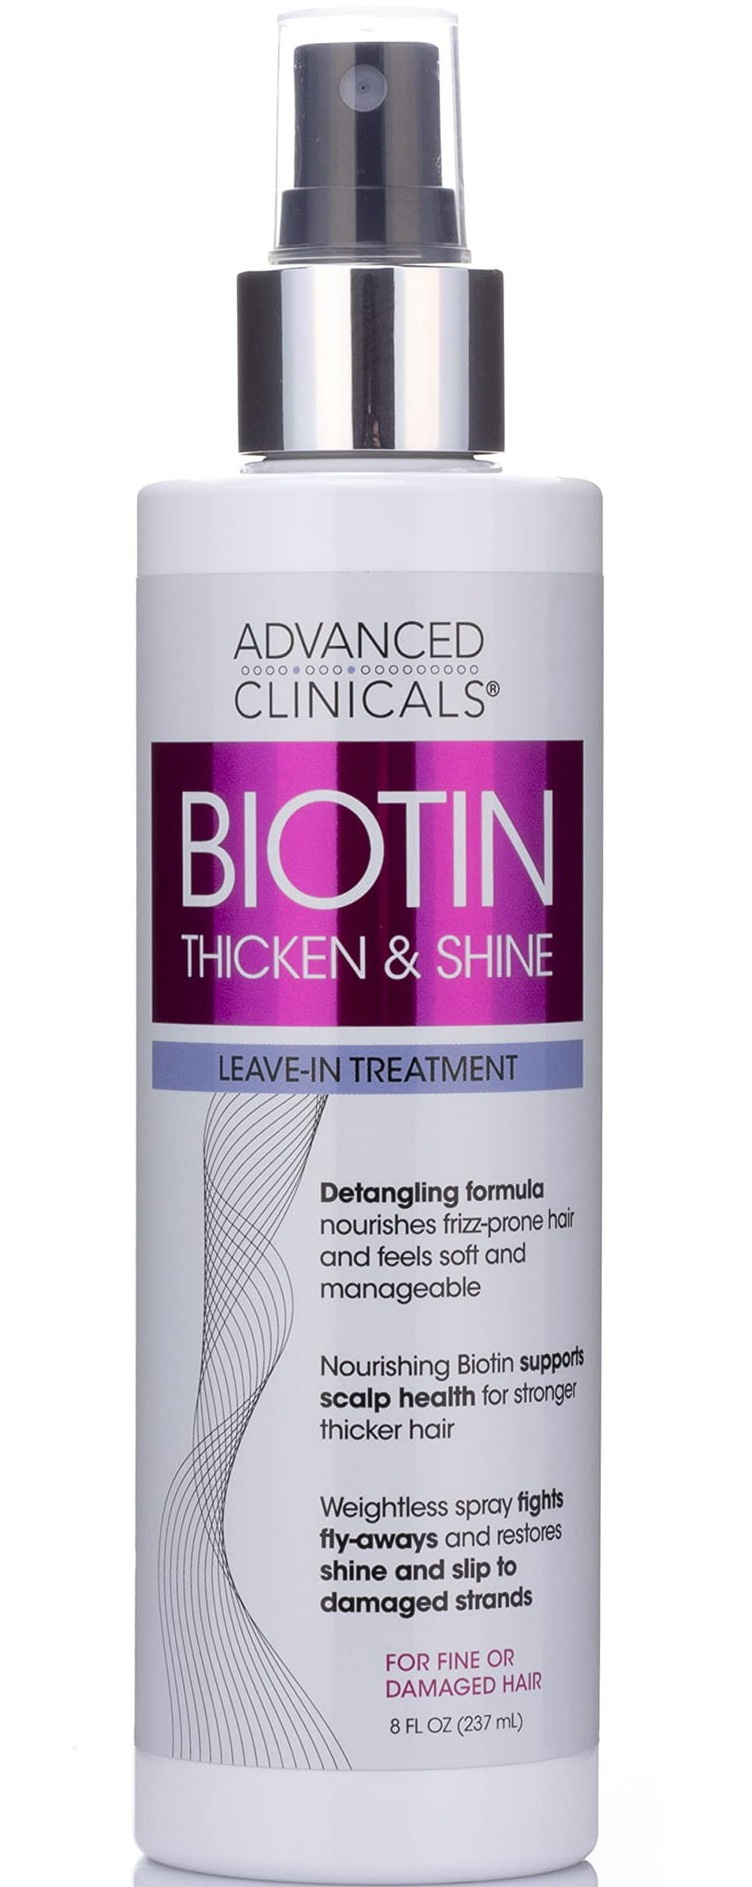 Advanced Clinicals Biotin Leave-in Treatment